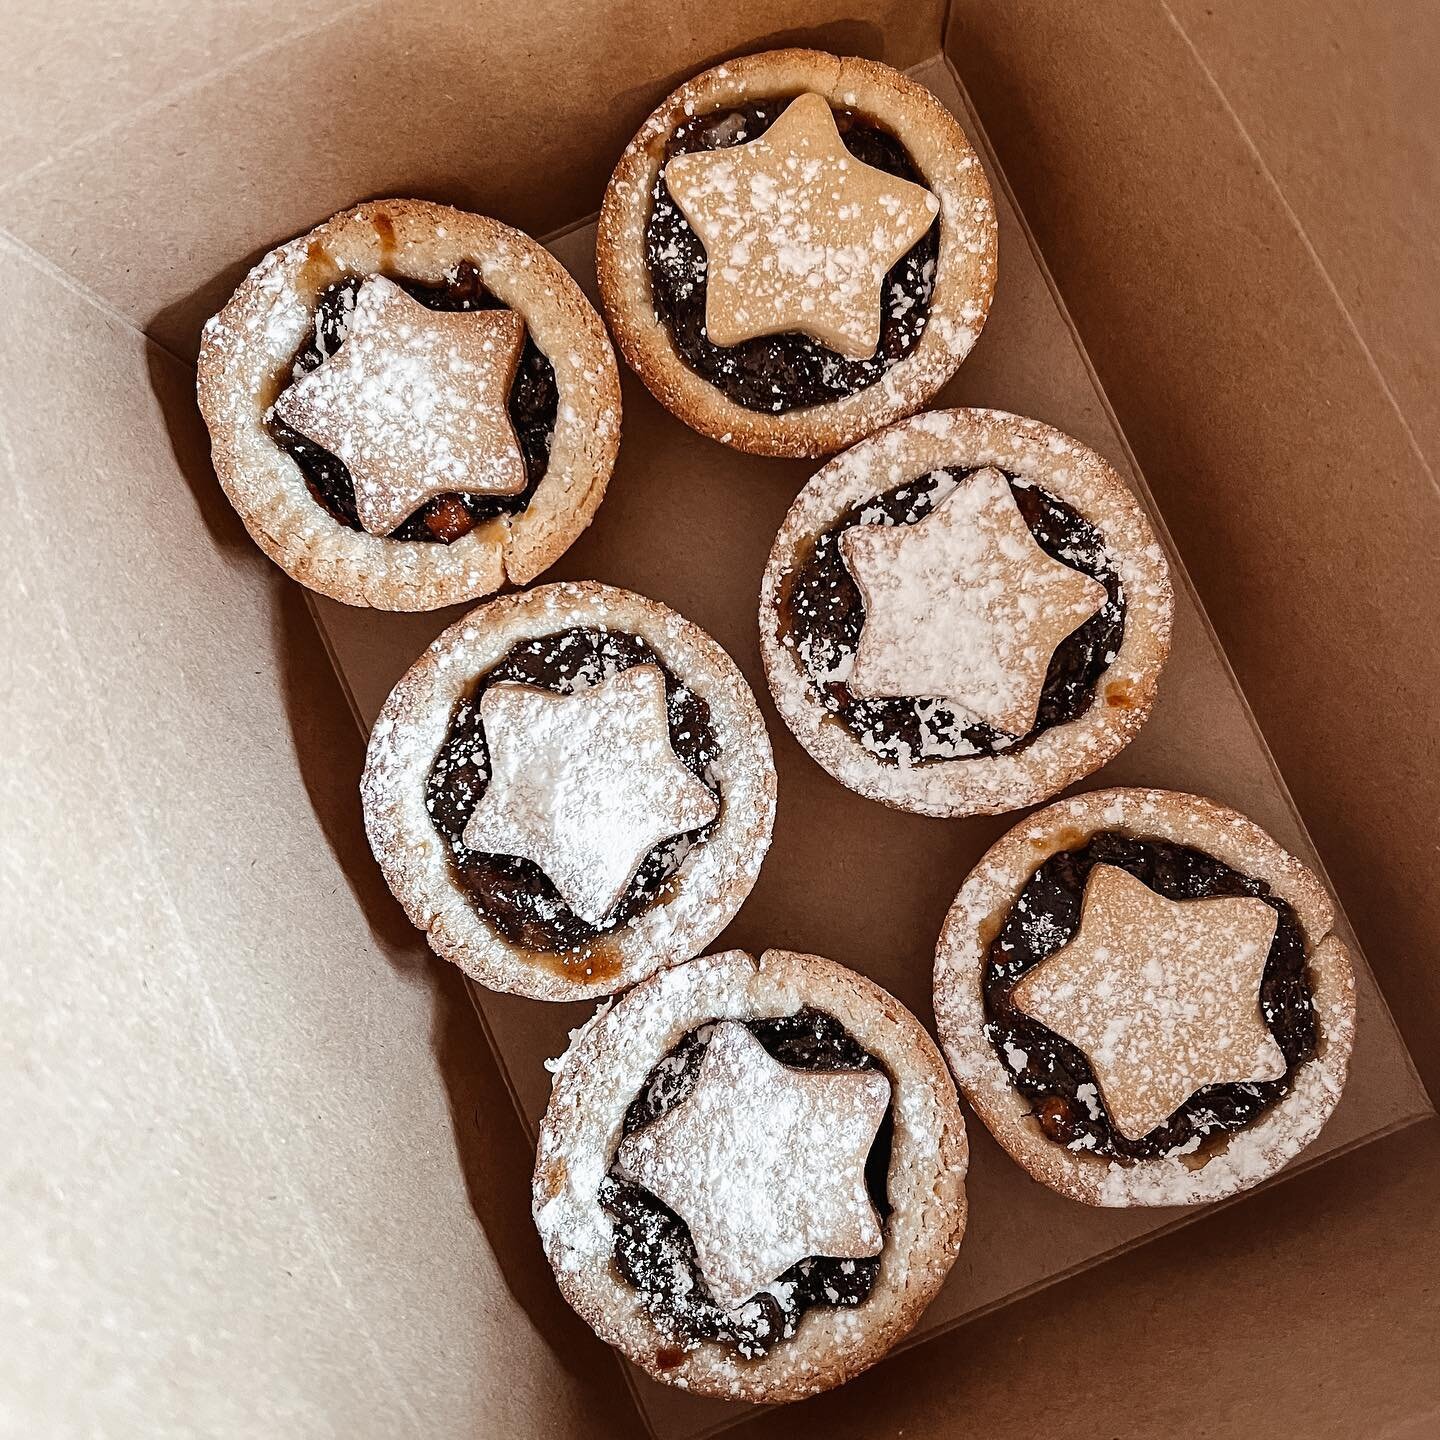 You can now order mince pies on our website! ⭐️
&bull;
Handmade with all butter pastry + deep filled with rich and juicy mincemeat. Available for collection or delivery (or pre-order ready for Christmas/Santa 🎅🏼)
&bull;
It&rsquo;s not Christmas &ls